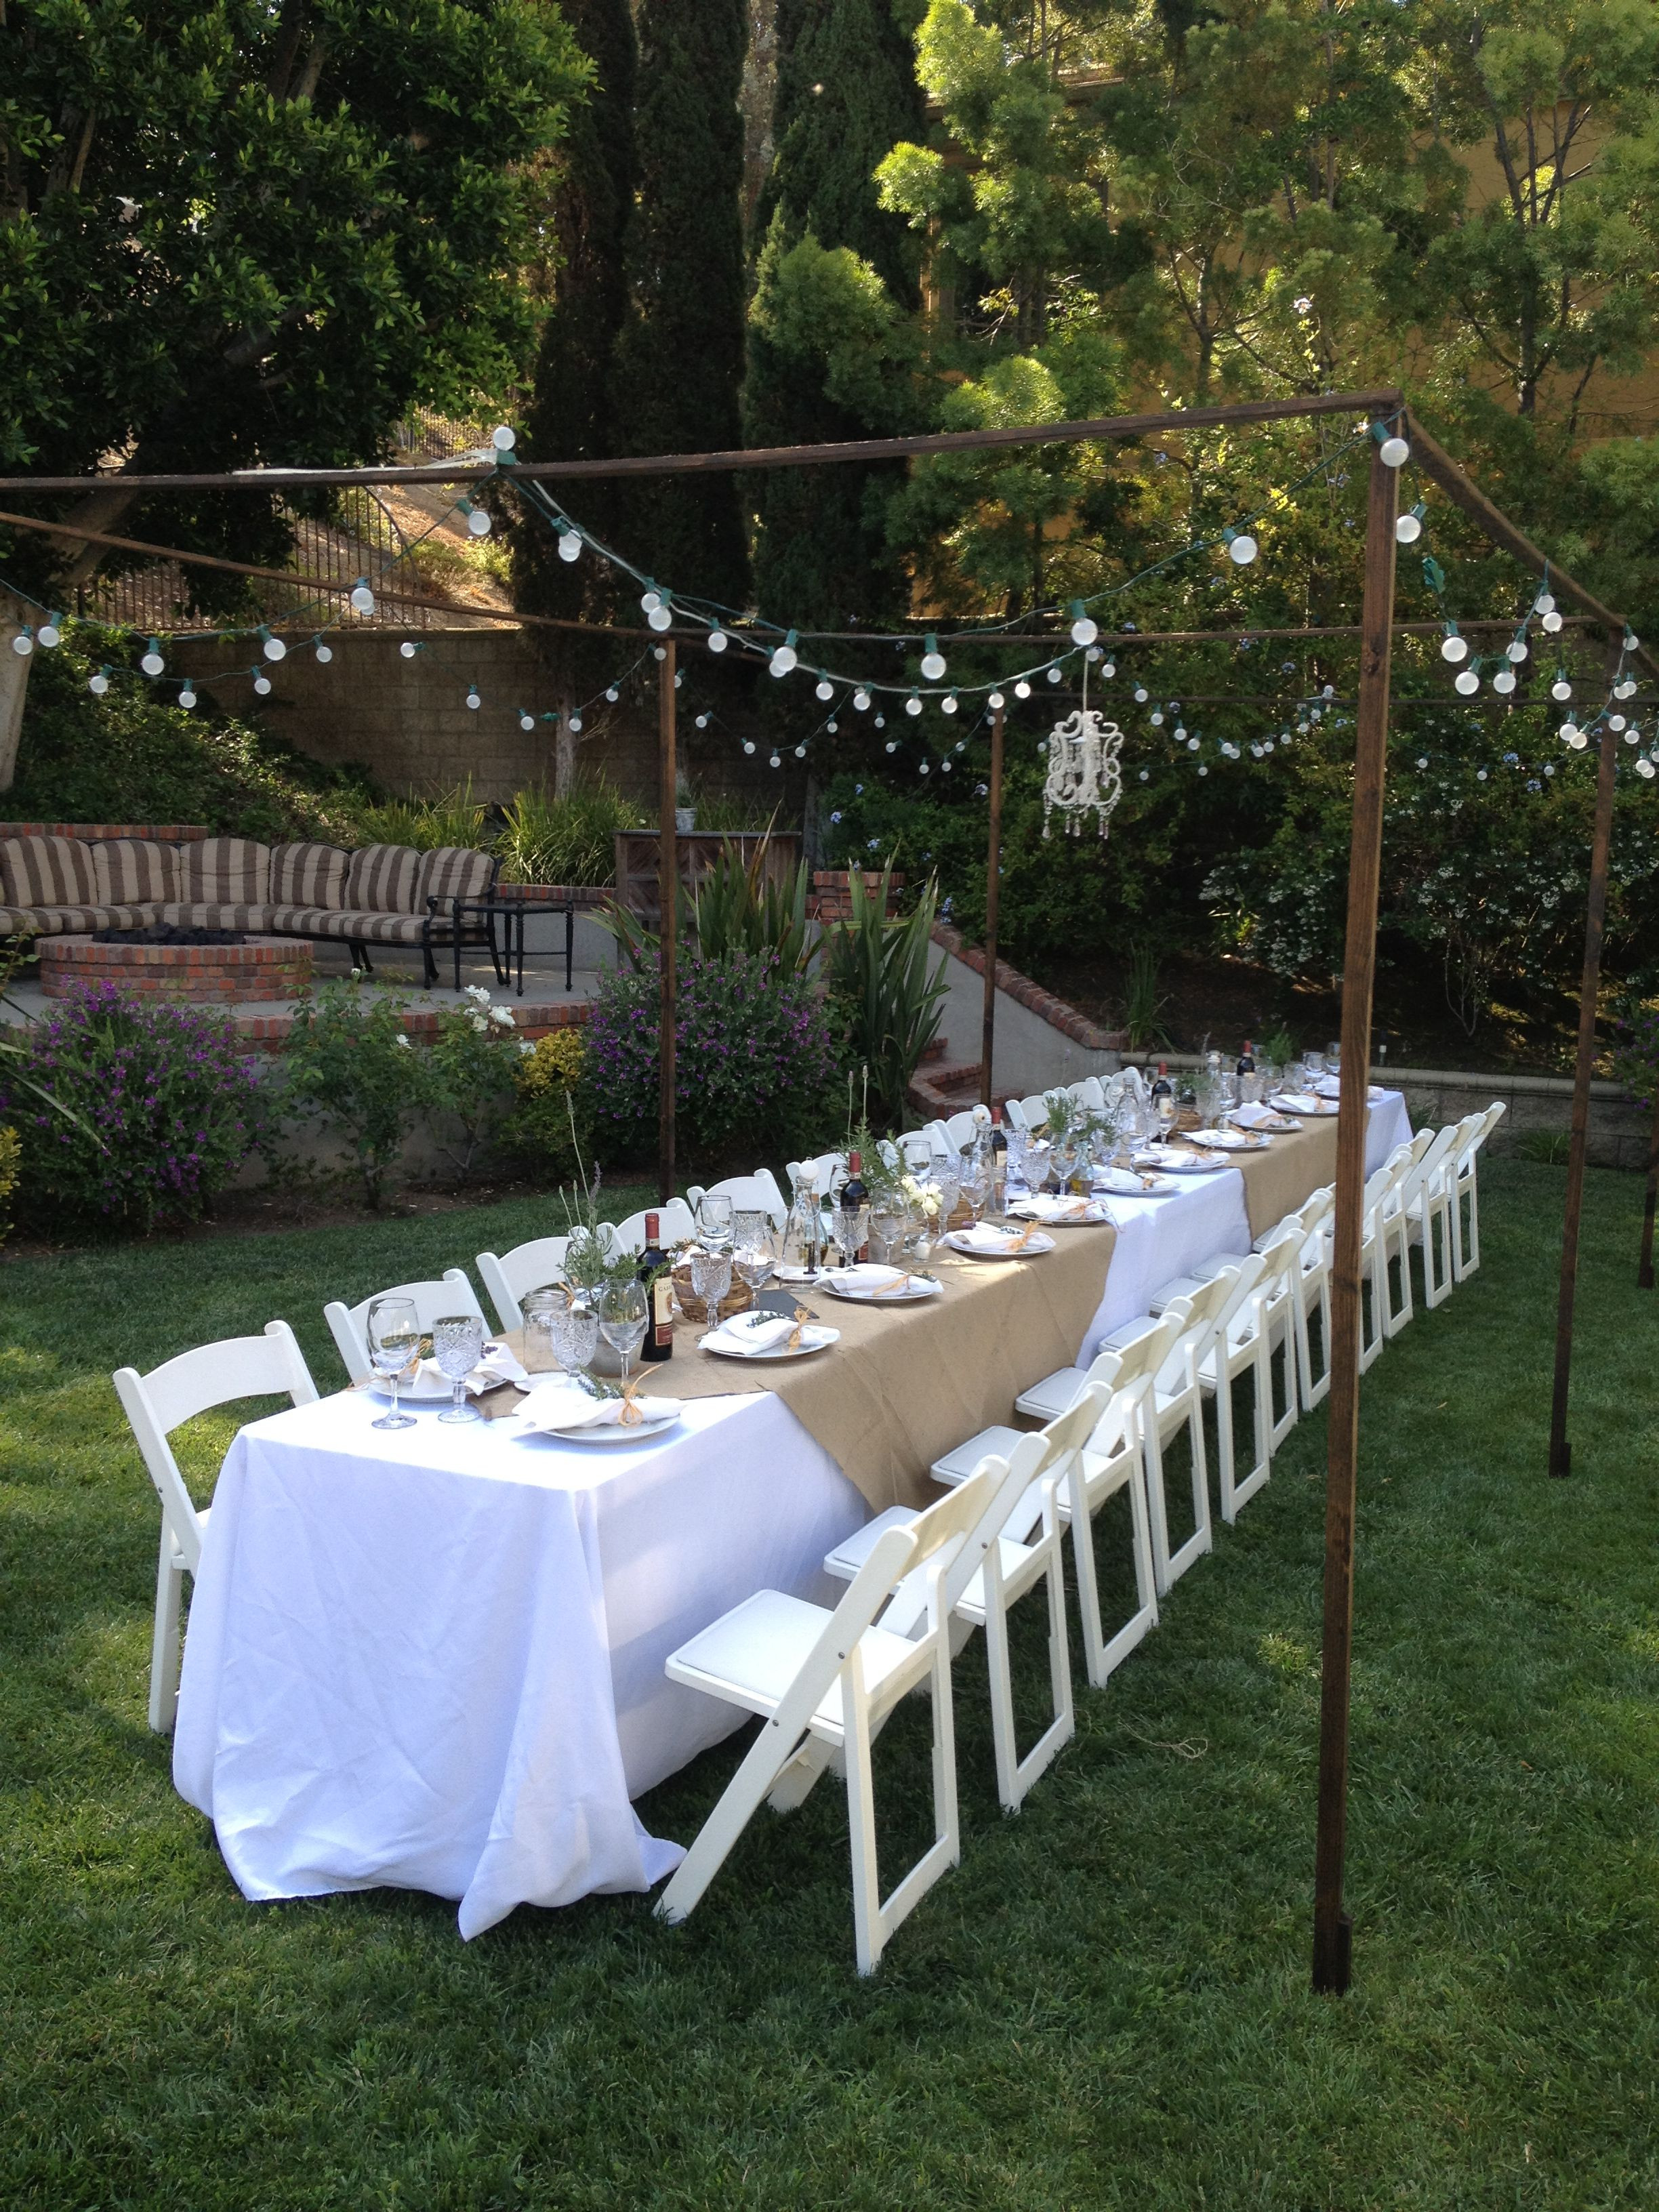 Outdoor Engagement Party Decoration Ideas
 Outdoor Tuscan Dinner Party